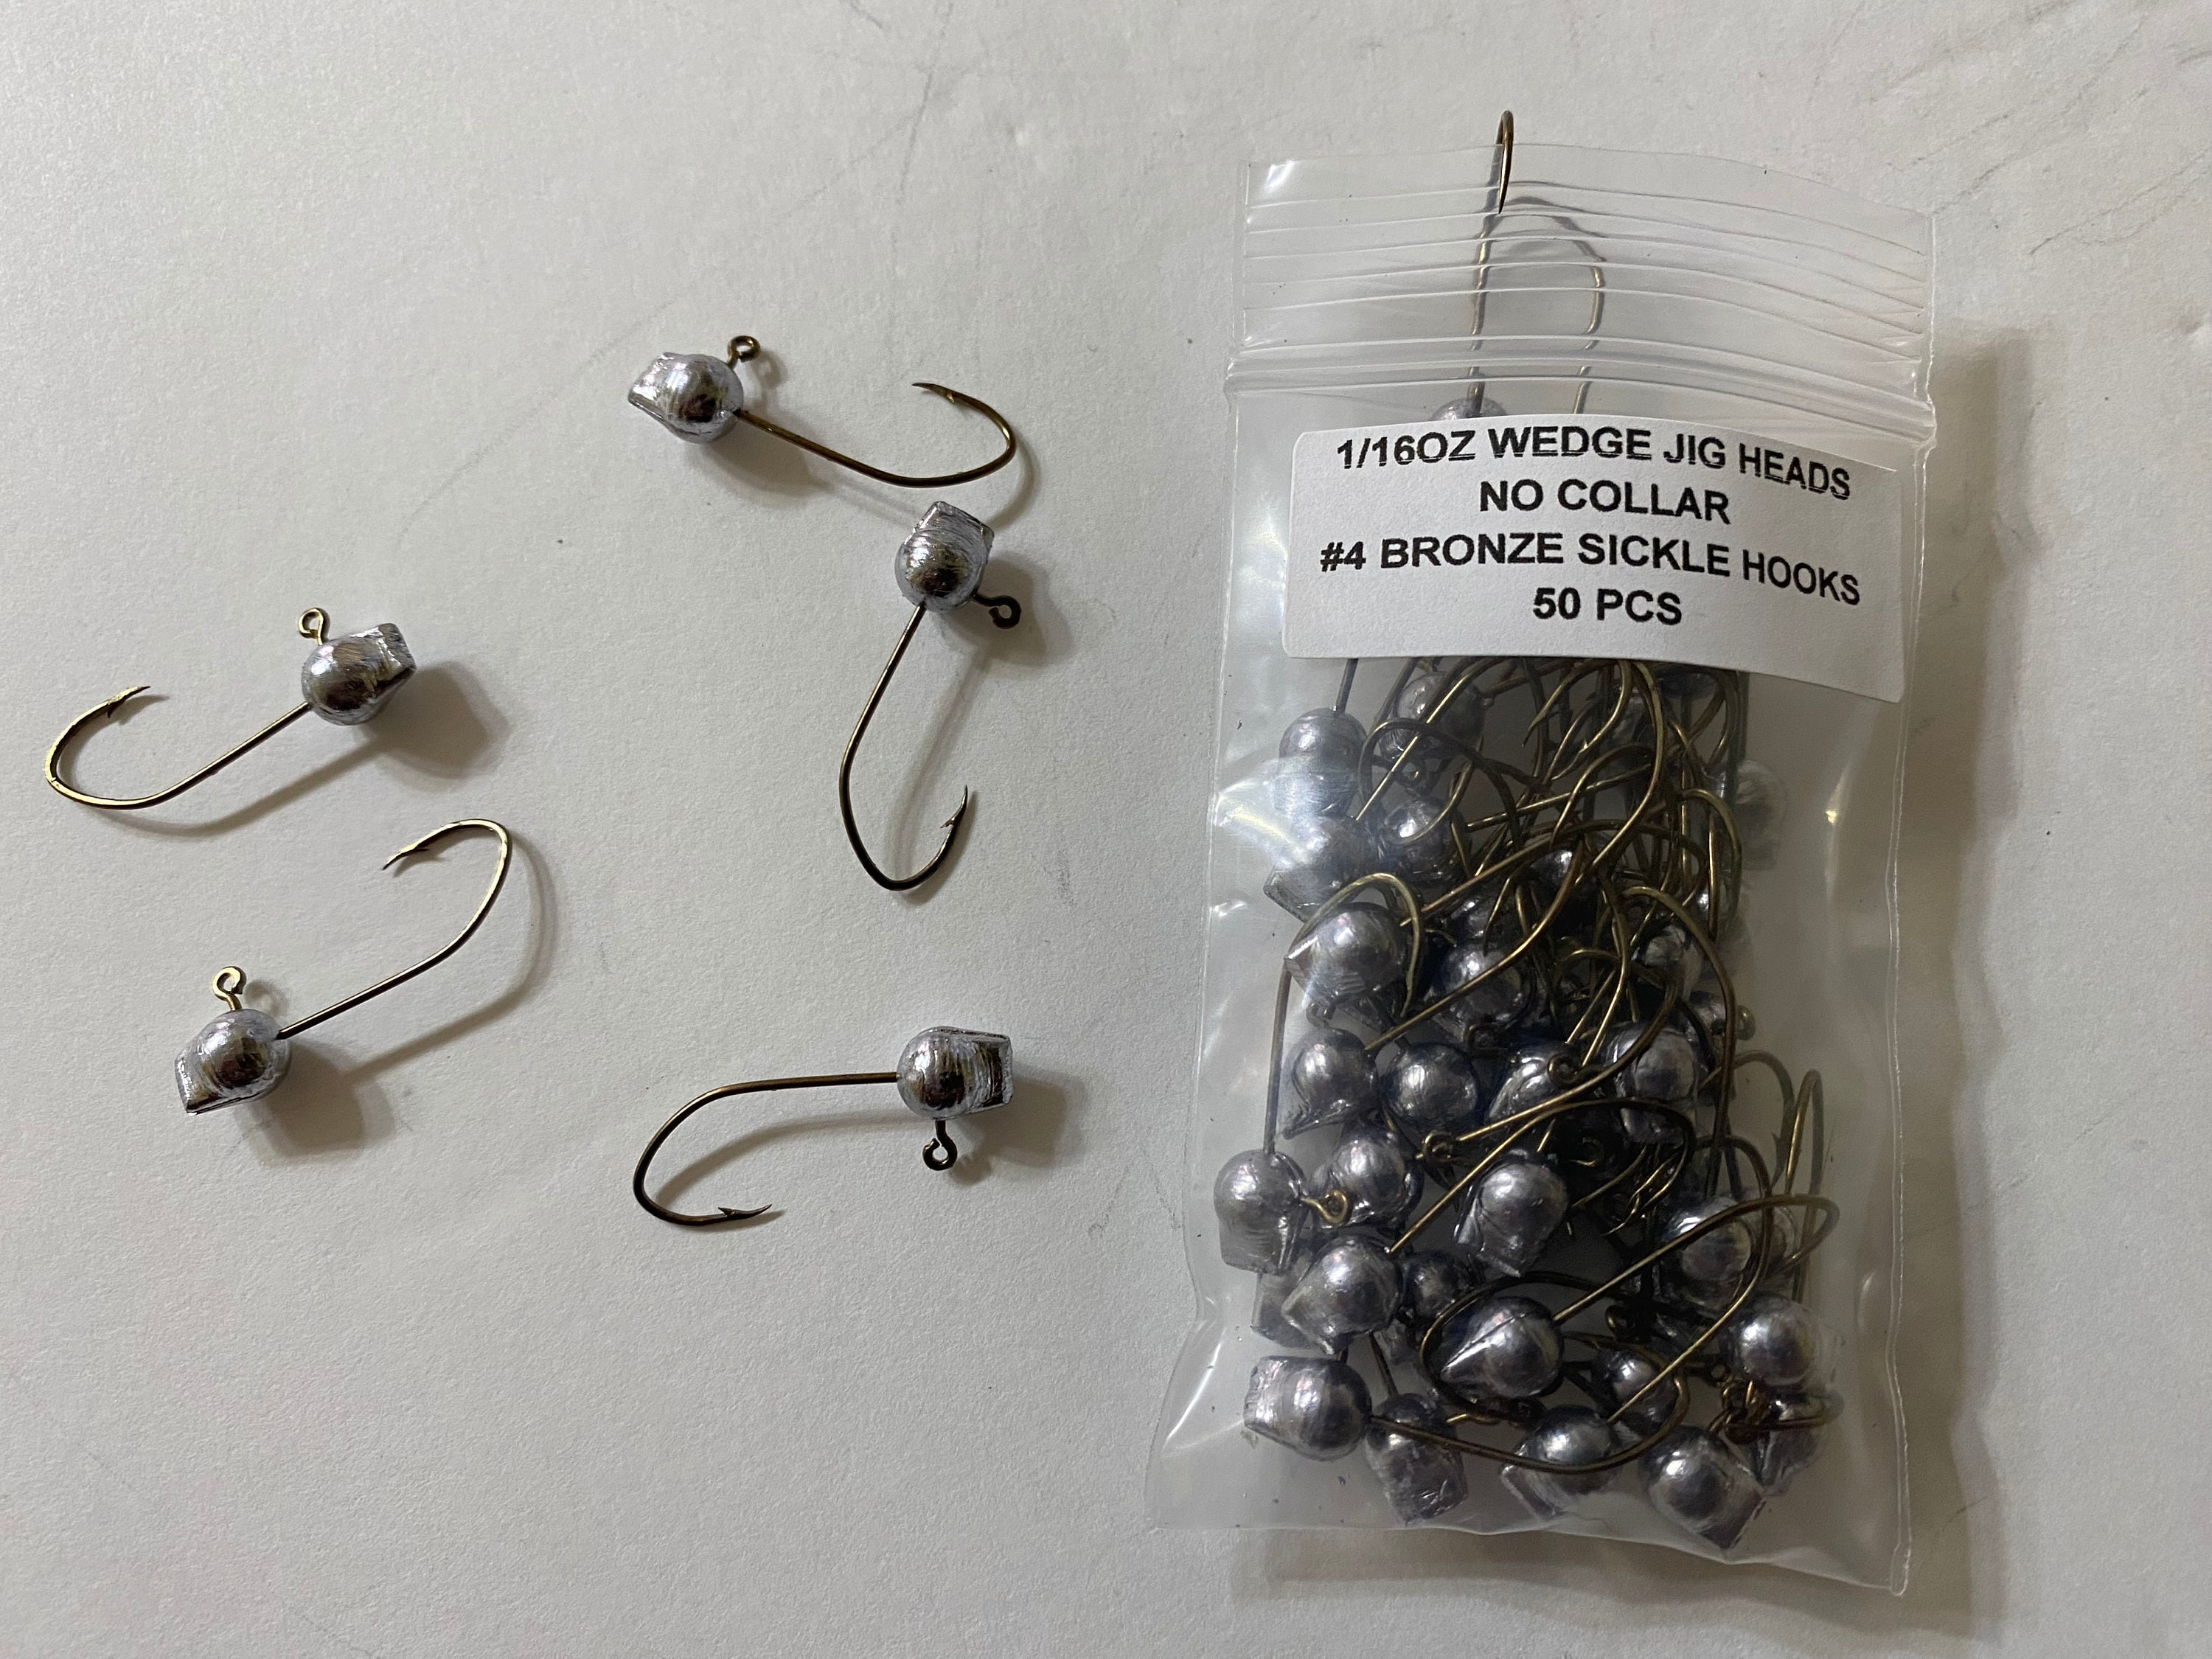 50 Pcs Unpainted 1/16oz Wedge Head Jigs With No Collar and a 4 Bronze  Sickle Hooks 